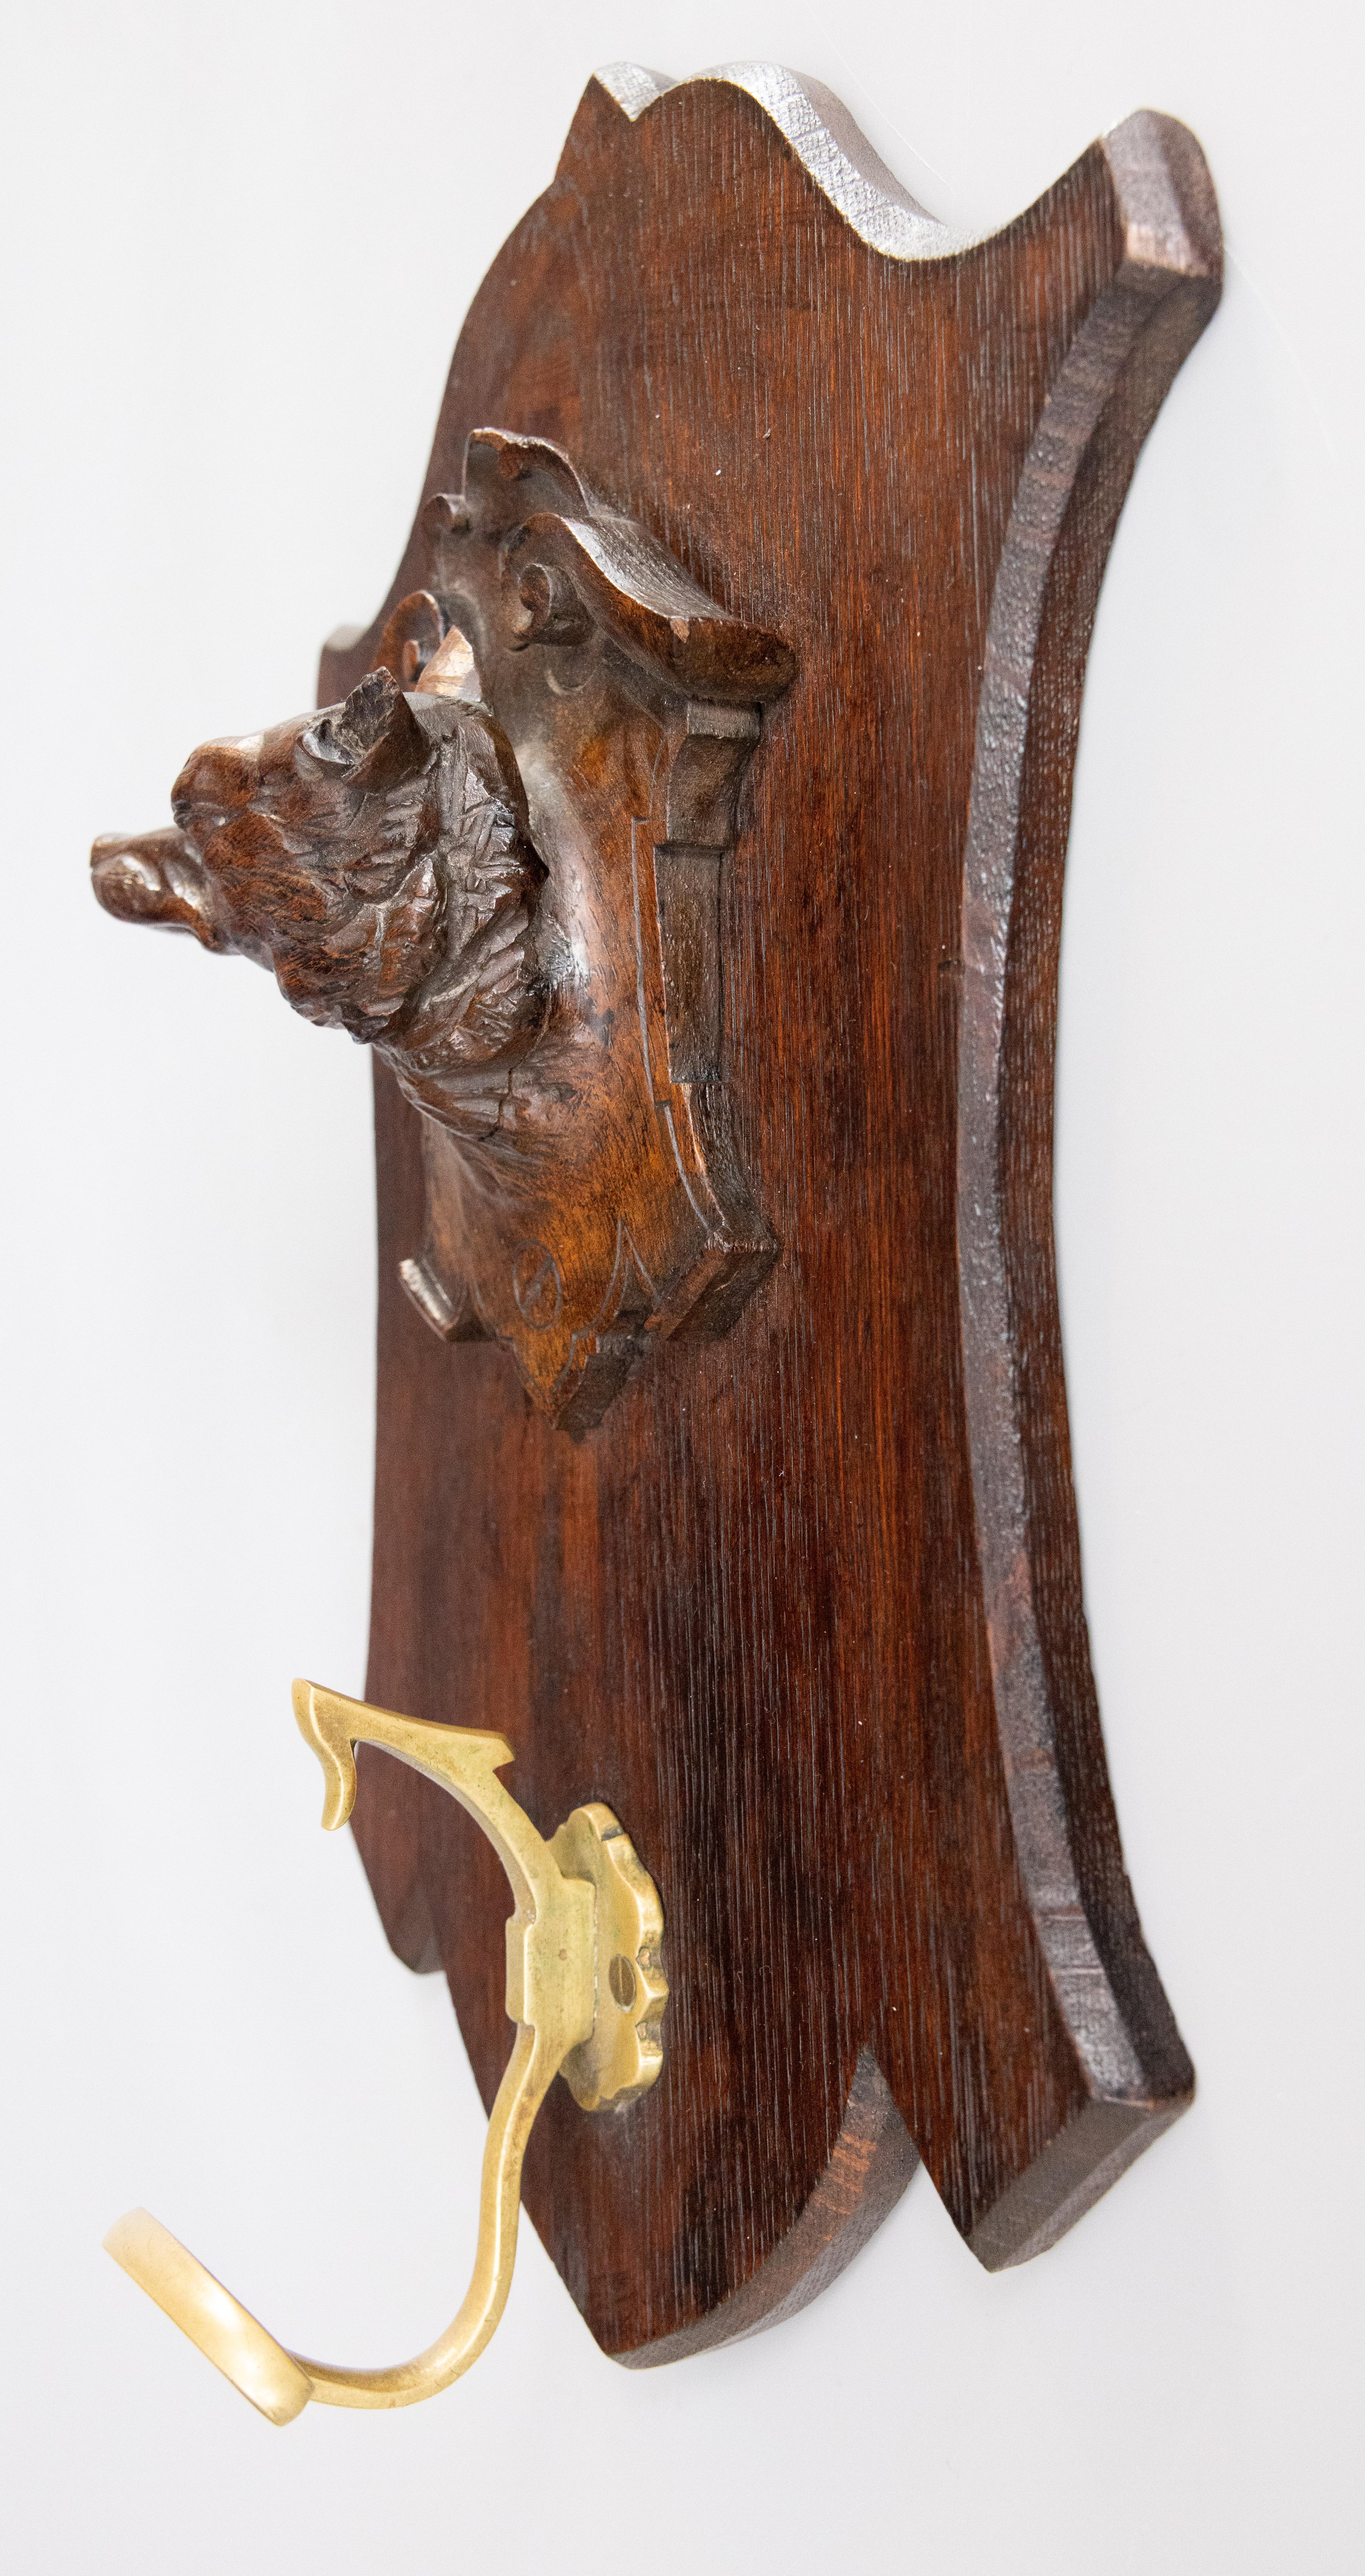 A fine antique black forest Swiss hand carved dog head sculpture plaque coat rack with a gilt bronze hook, circa 1900. It's perfect for your rustic lodge decor in an entryway for hanging a coat, hat, or leashes, and it would also be a wonderful gift